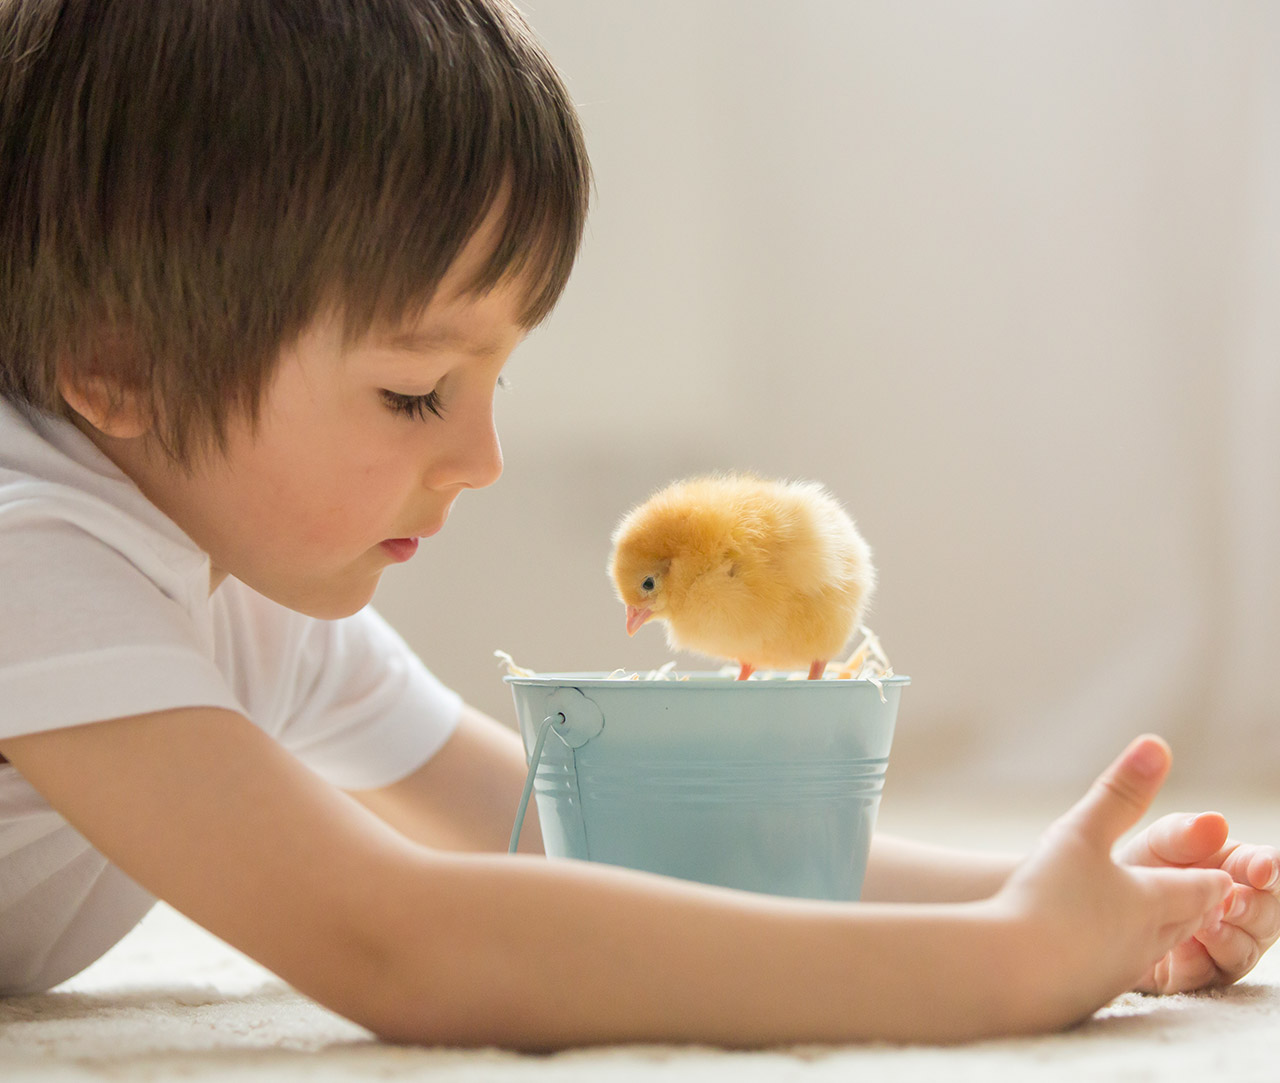 Boy looking at baby chick